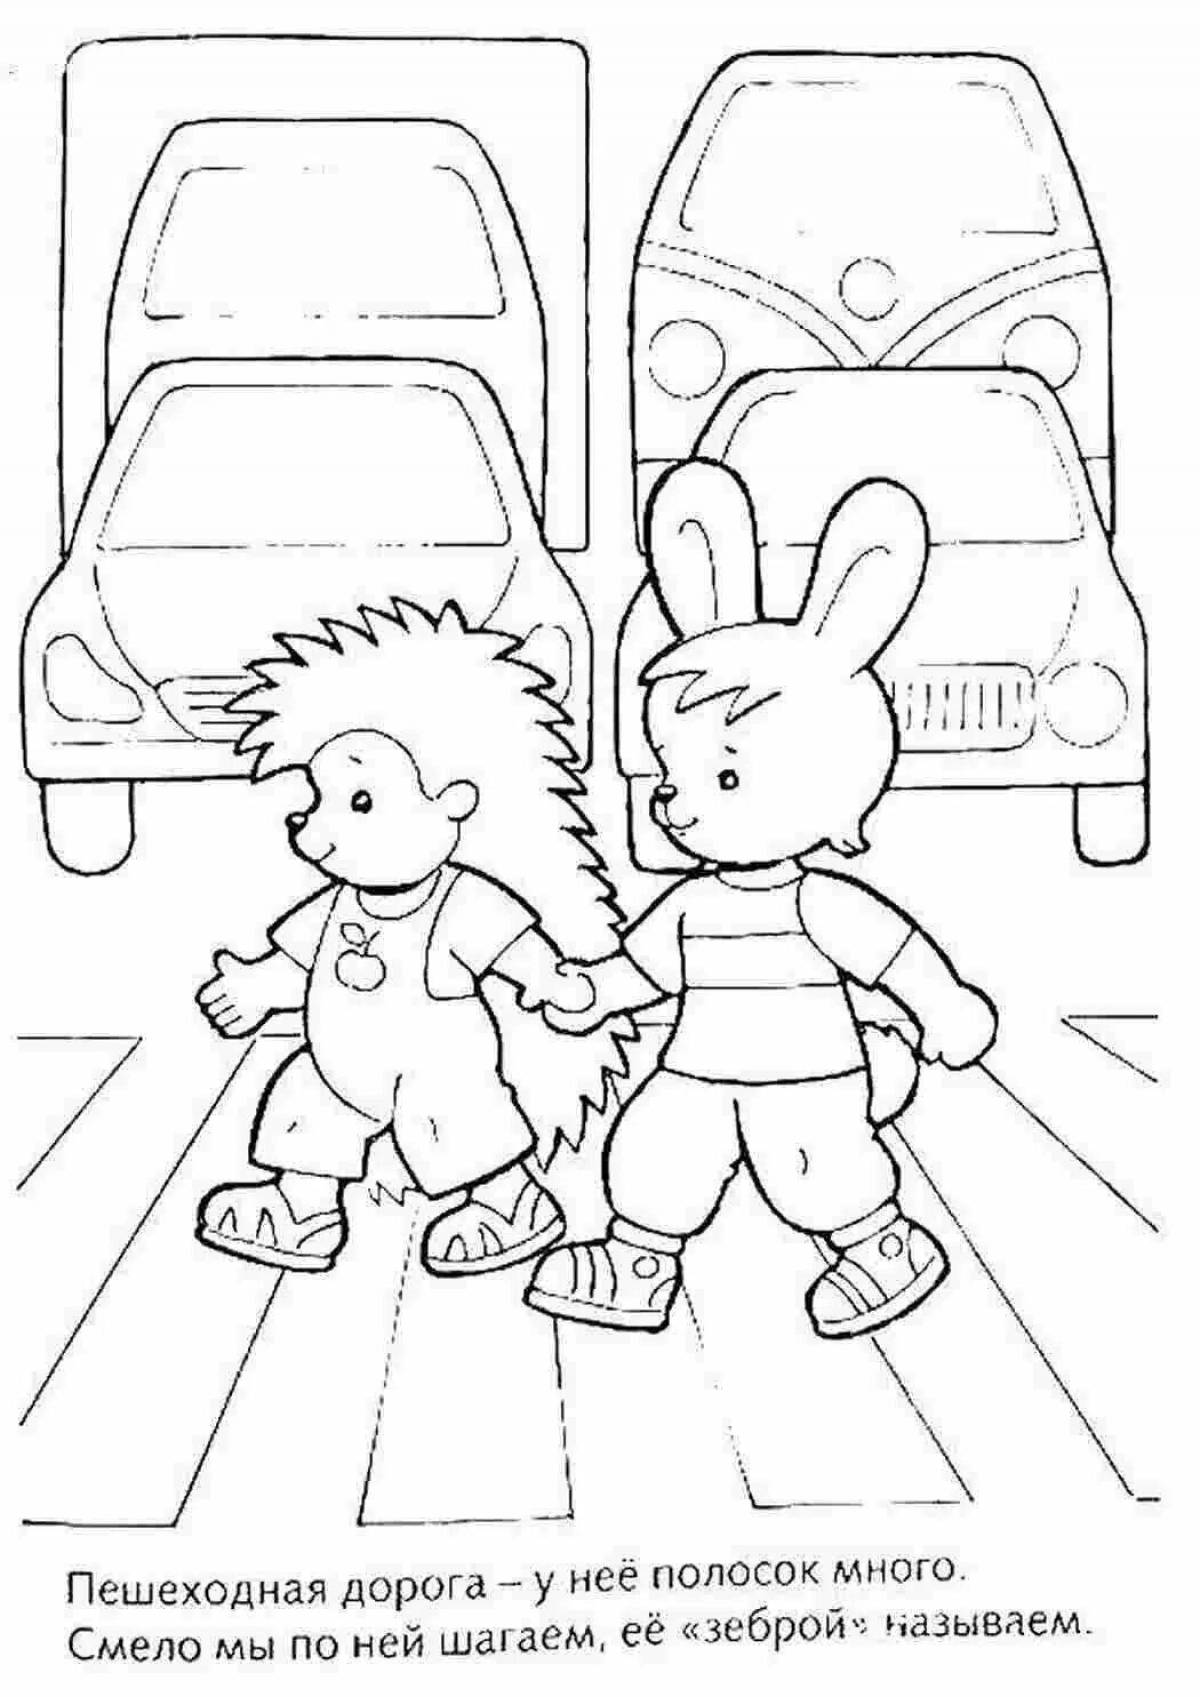 Colorful safe road coloring page